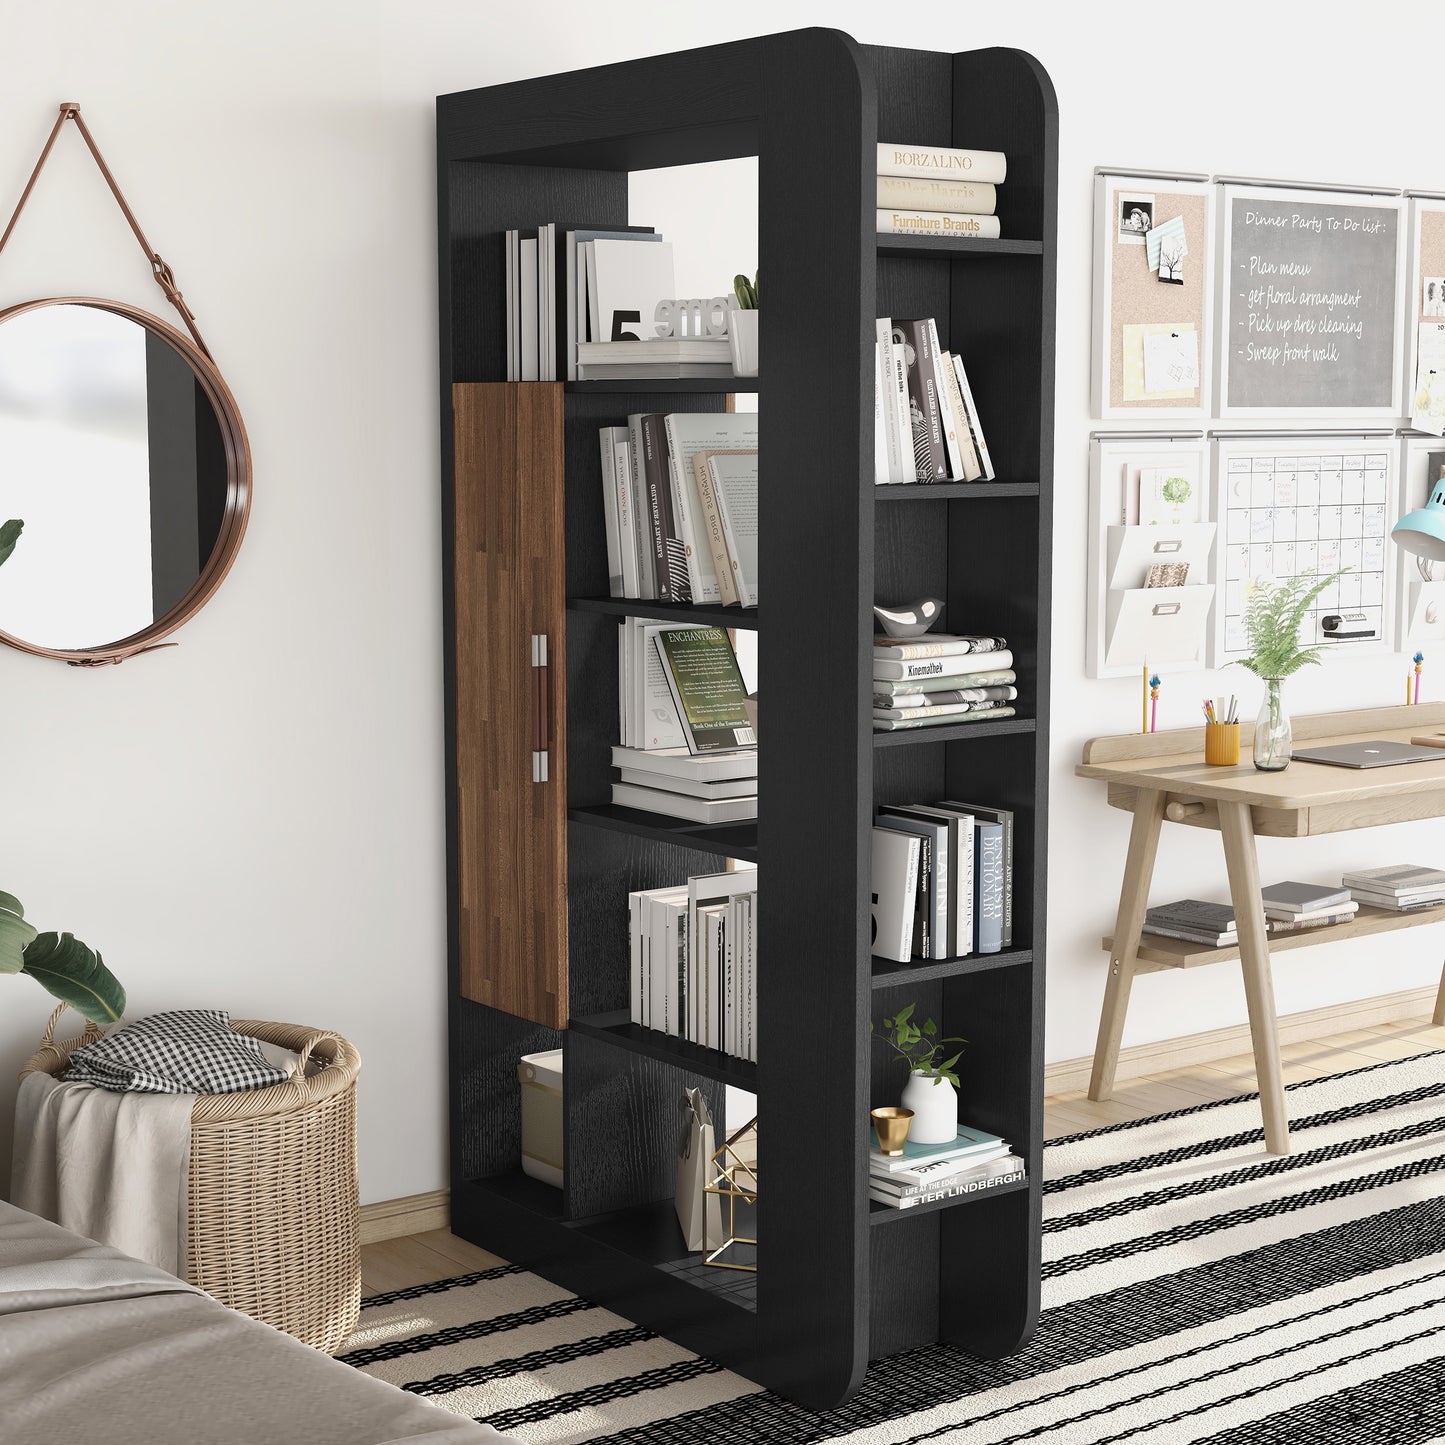 Left angled contemporary black 13-shelf two-sided bookcase with wood doors in a bedroom with accessories